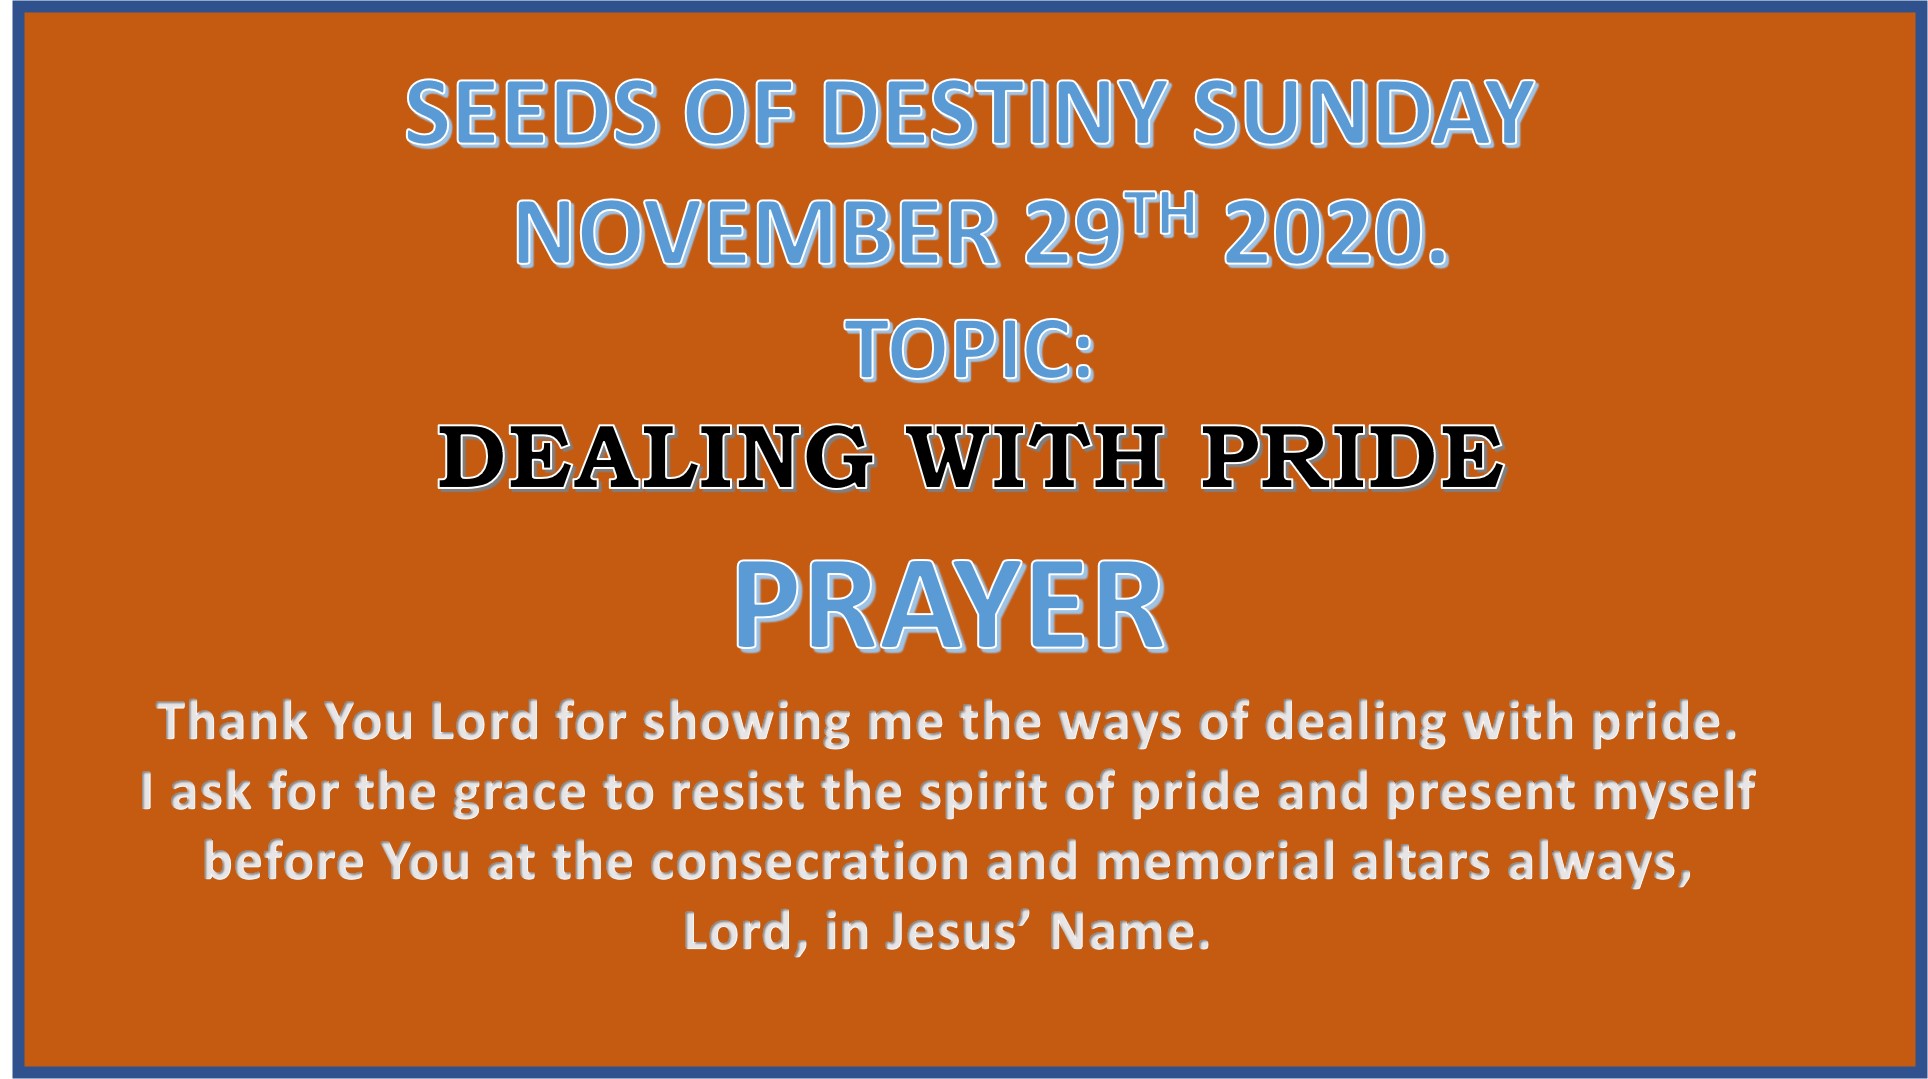 Seeds of Destiny Sunday 29th November 2020 by Dr Paul Enenche